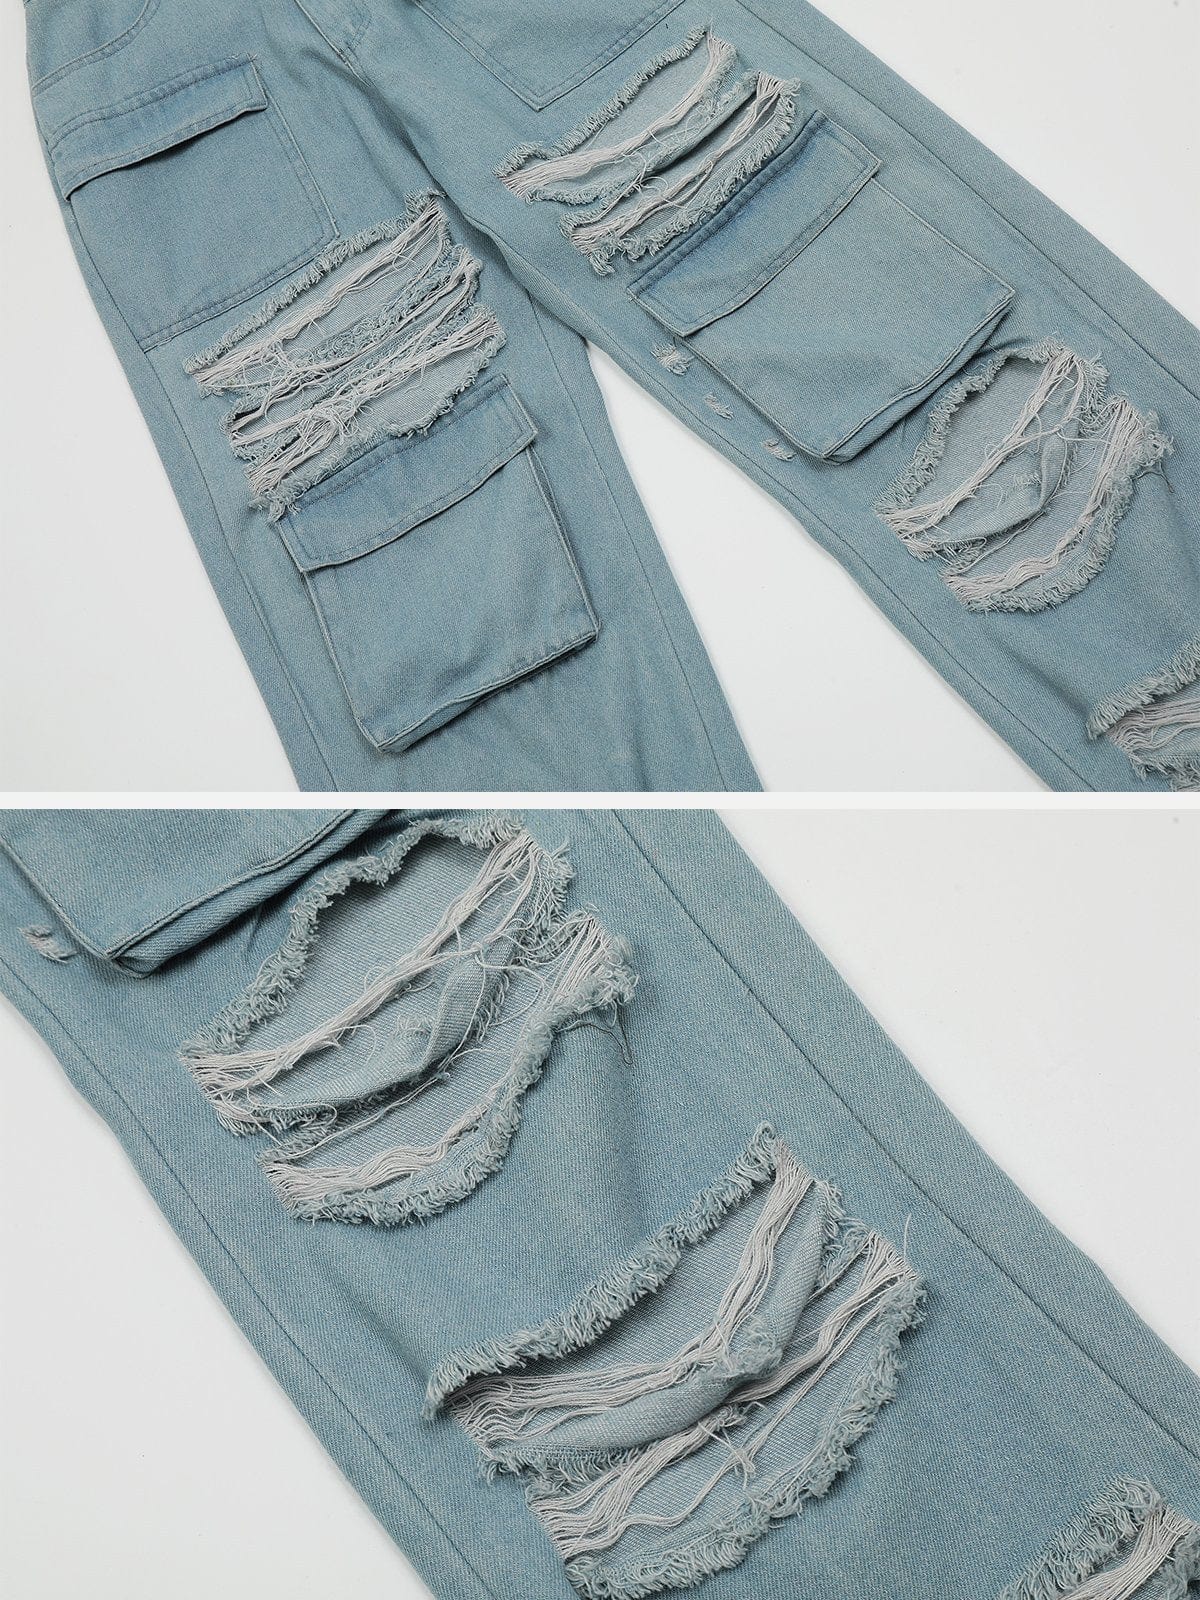 TO Distressed Multi Pocket Jeans